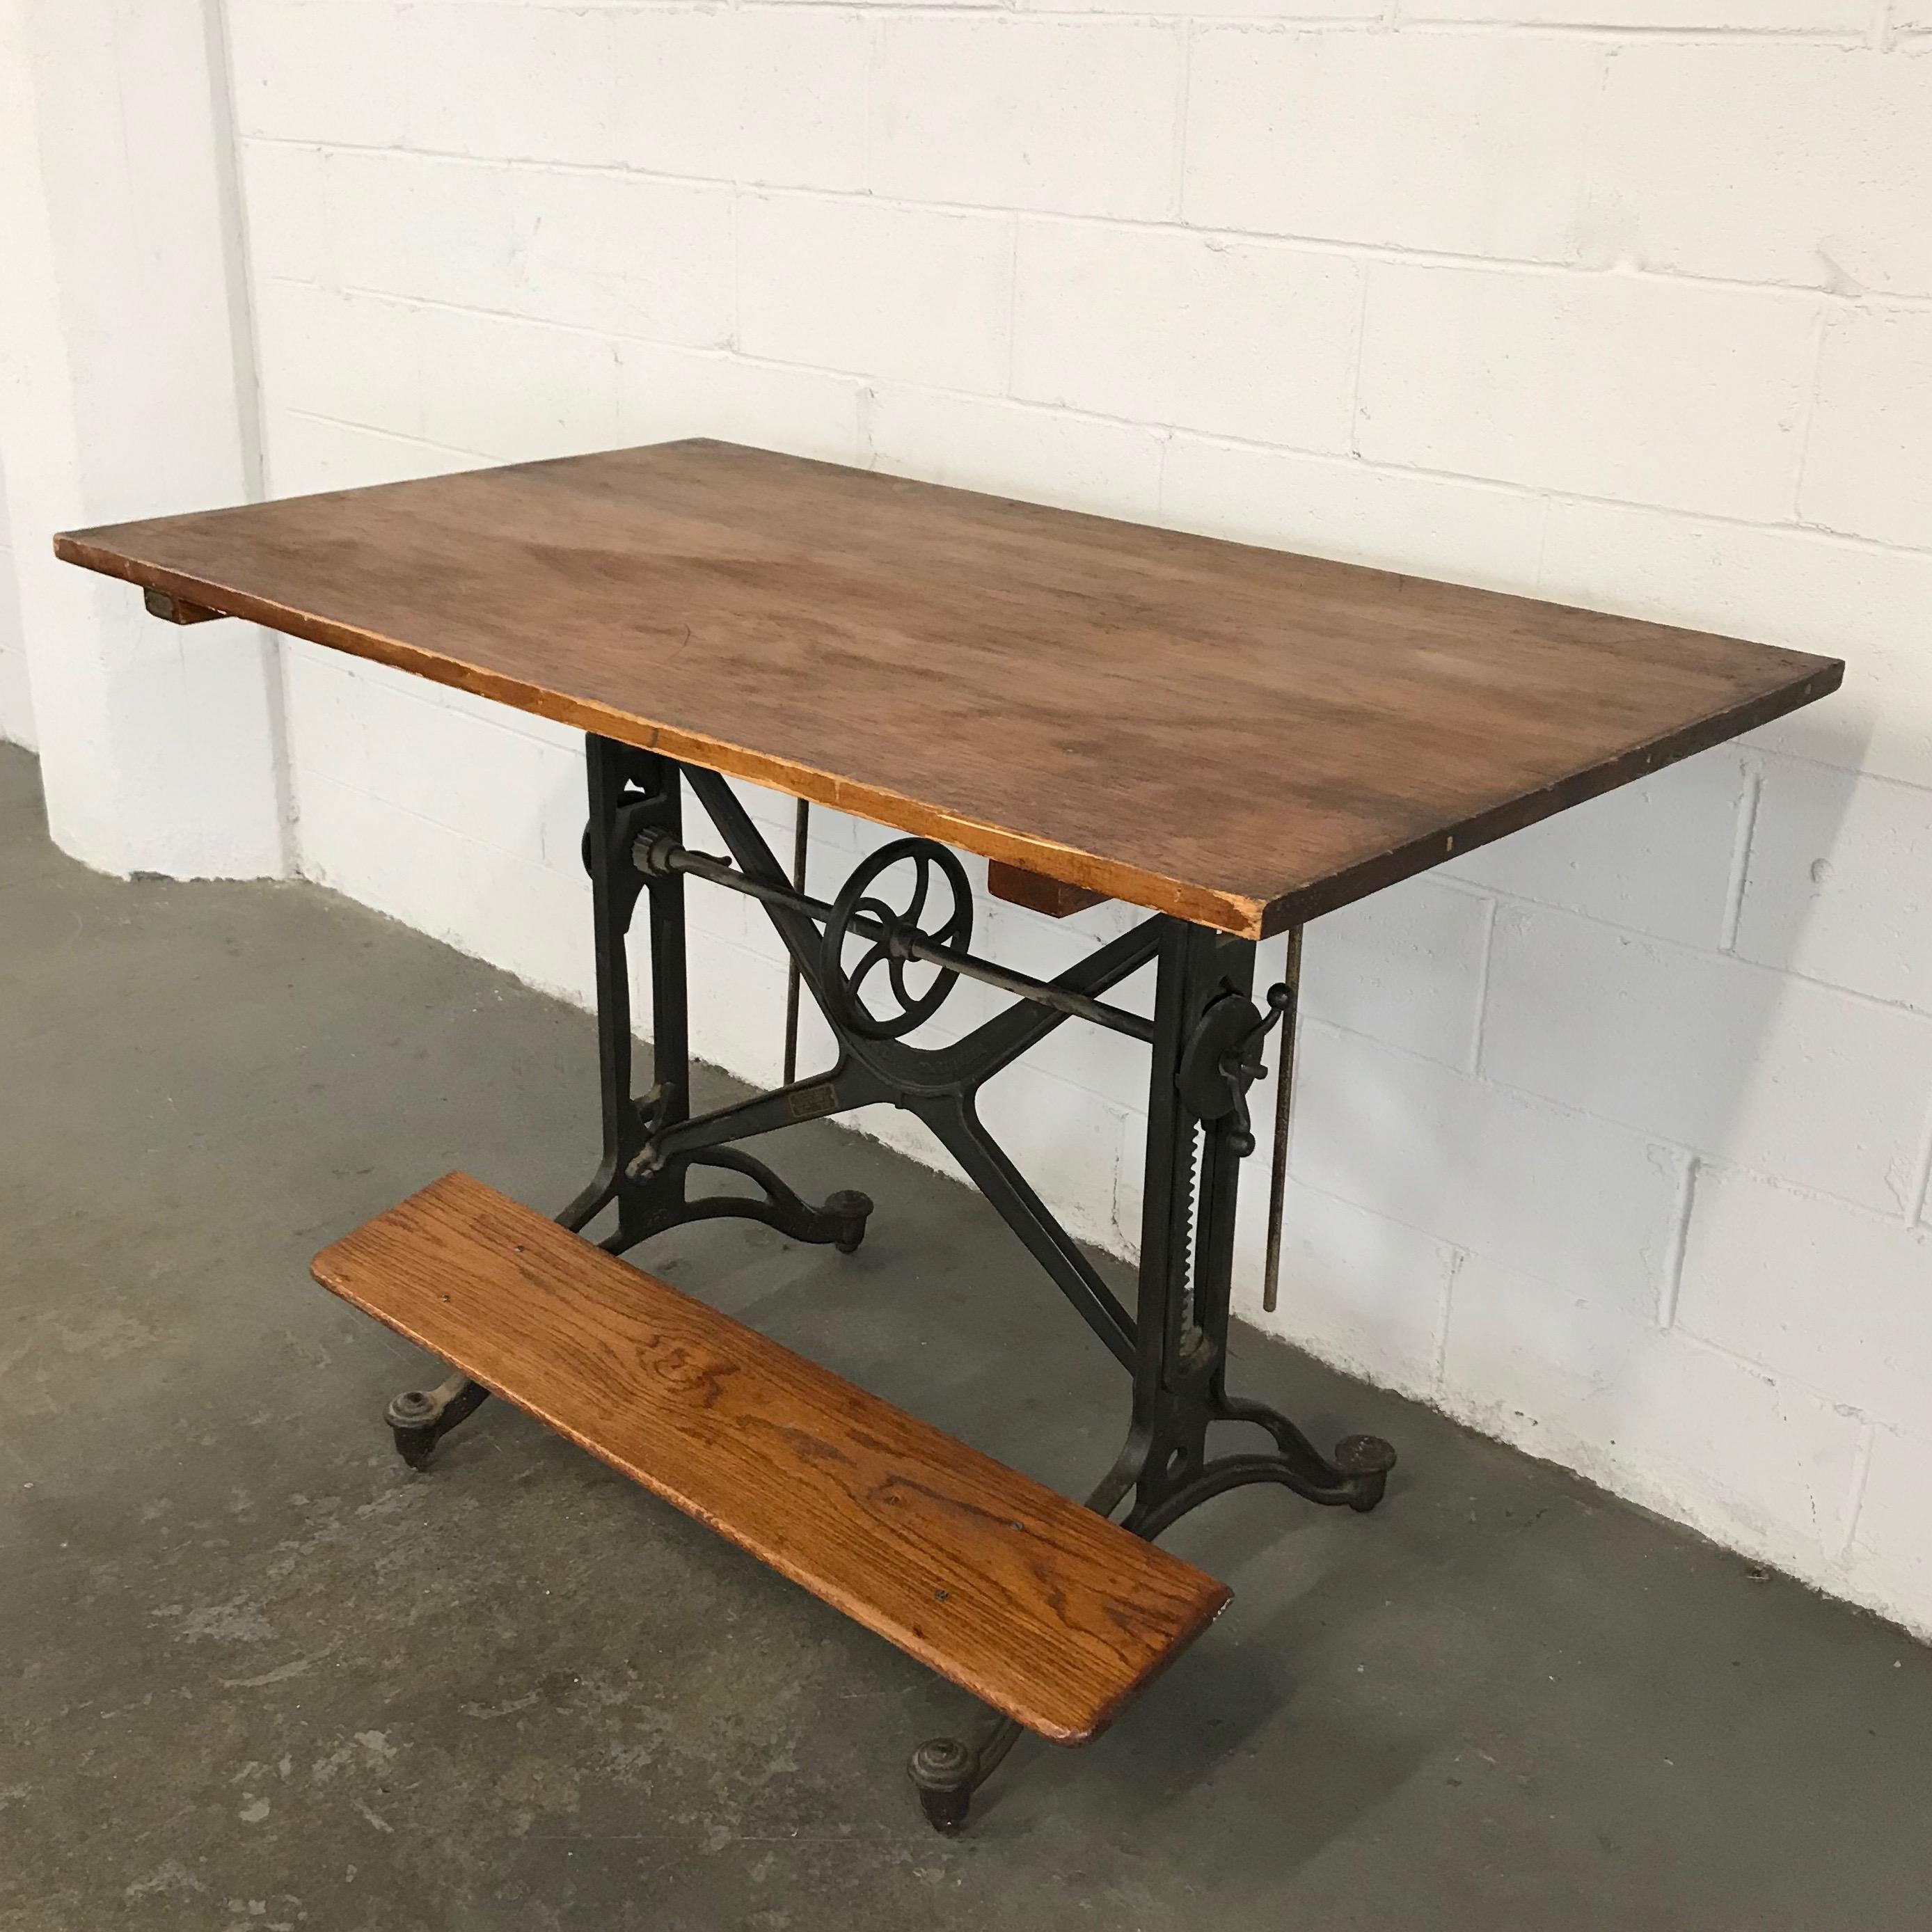 Early 20th century, drafting table model #16535 by Keuffel & Esser Co features a height and tilt adjustable, cast iron base with pine top and oak foot rest. The table is tilt adjustable and height is adjustable from 37.5 inches to 48 inches.